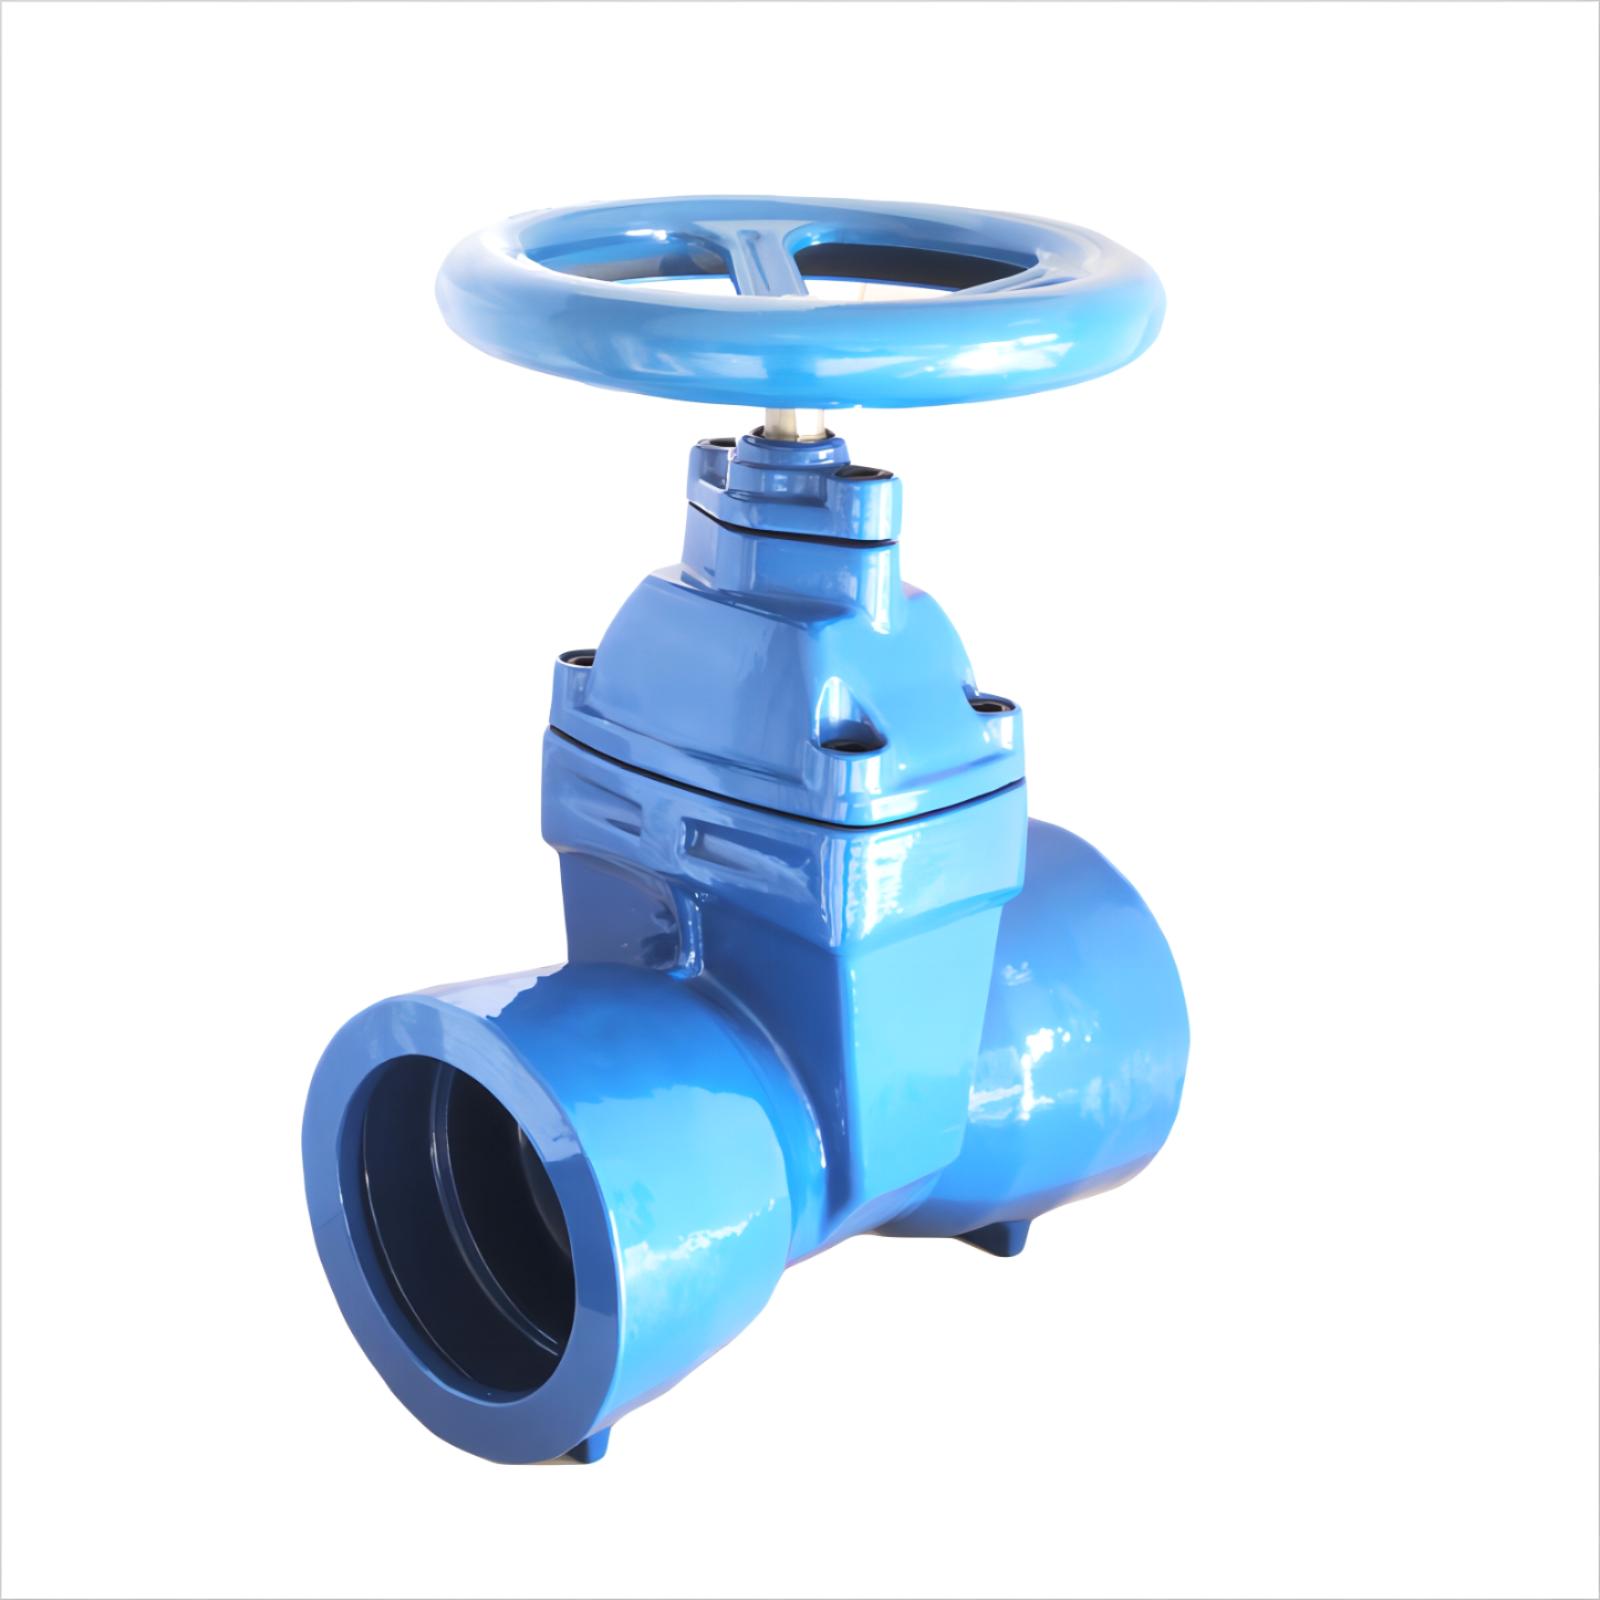 Socket End Resilient Gate Valve For DI Pipe PN16